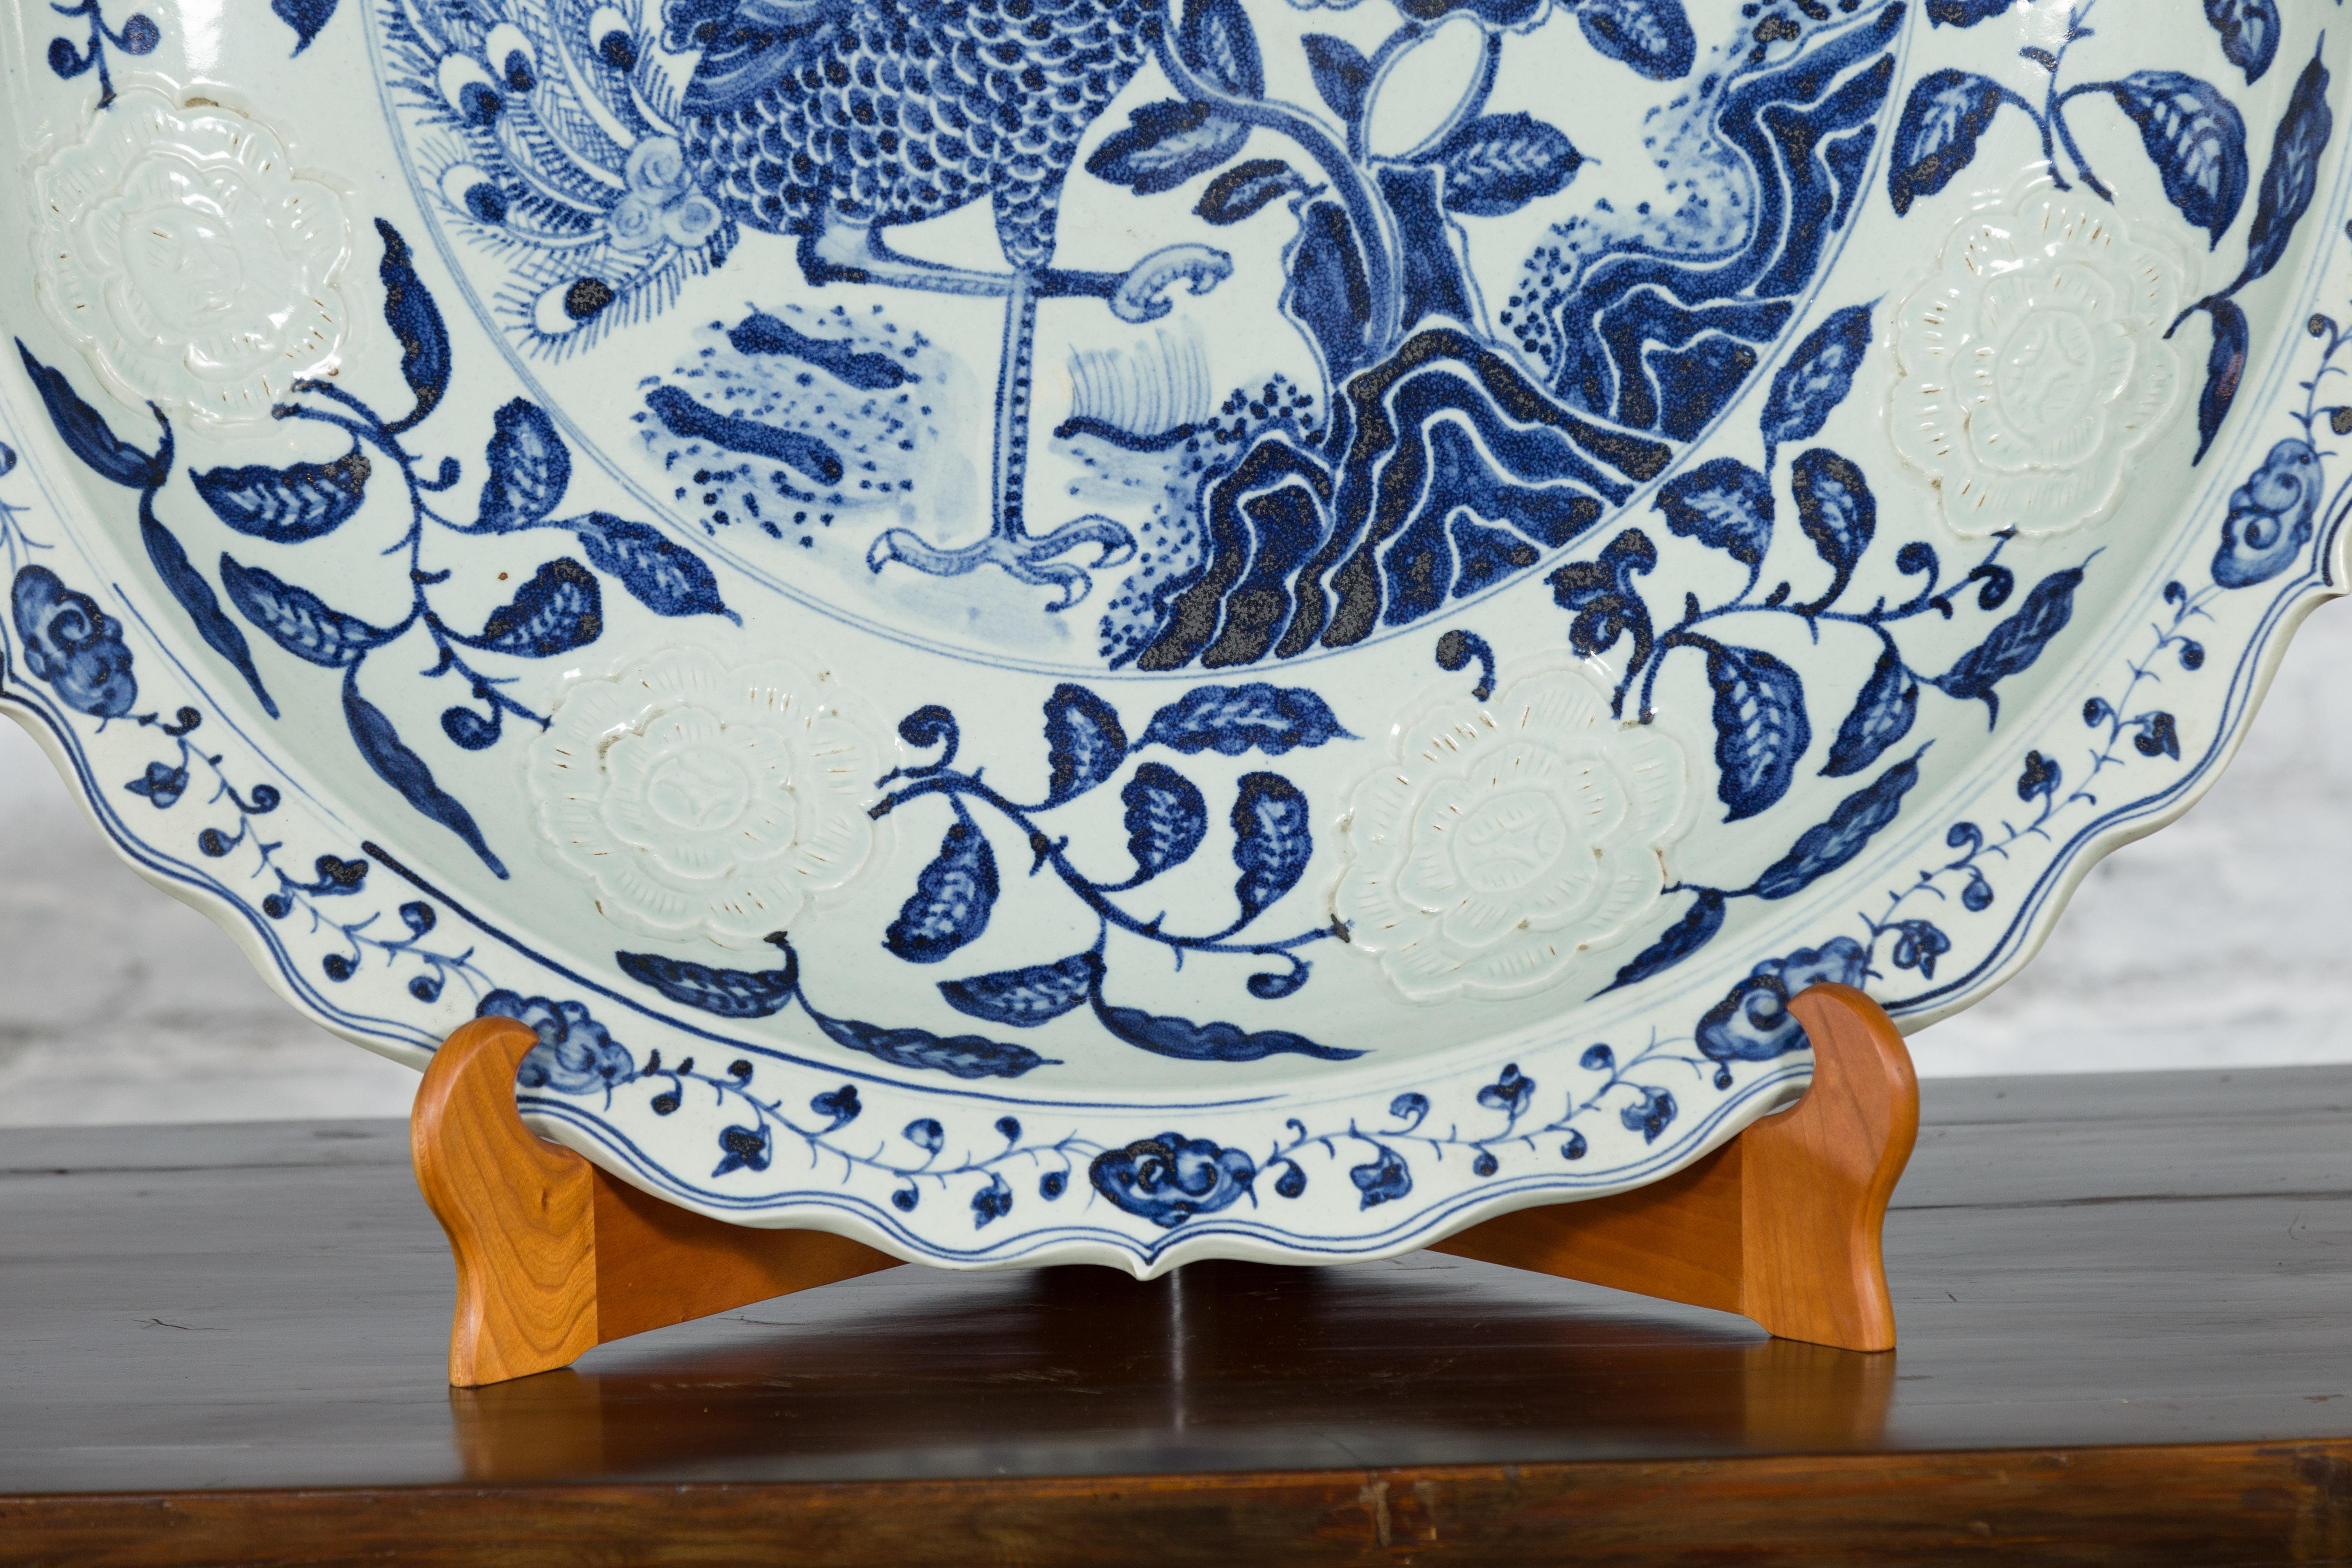 Large Chinese Porcelain Charger Plate with Hand-Painted Blue and White Décor For Sale 1